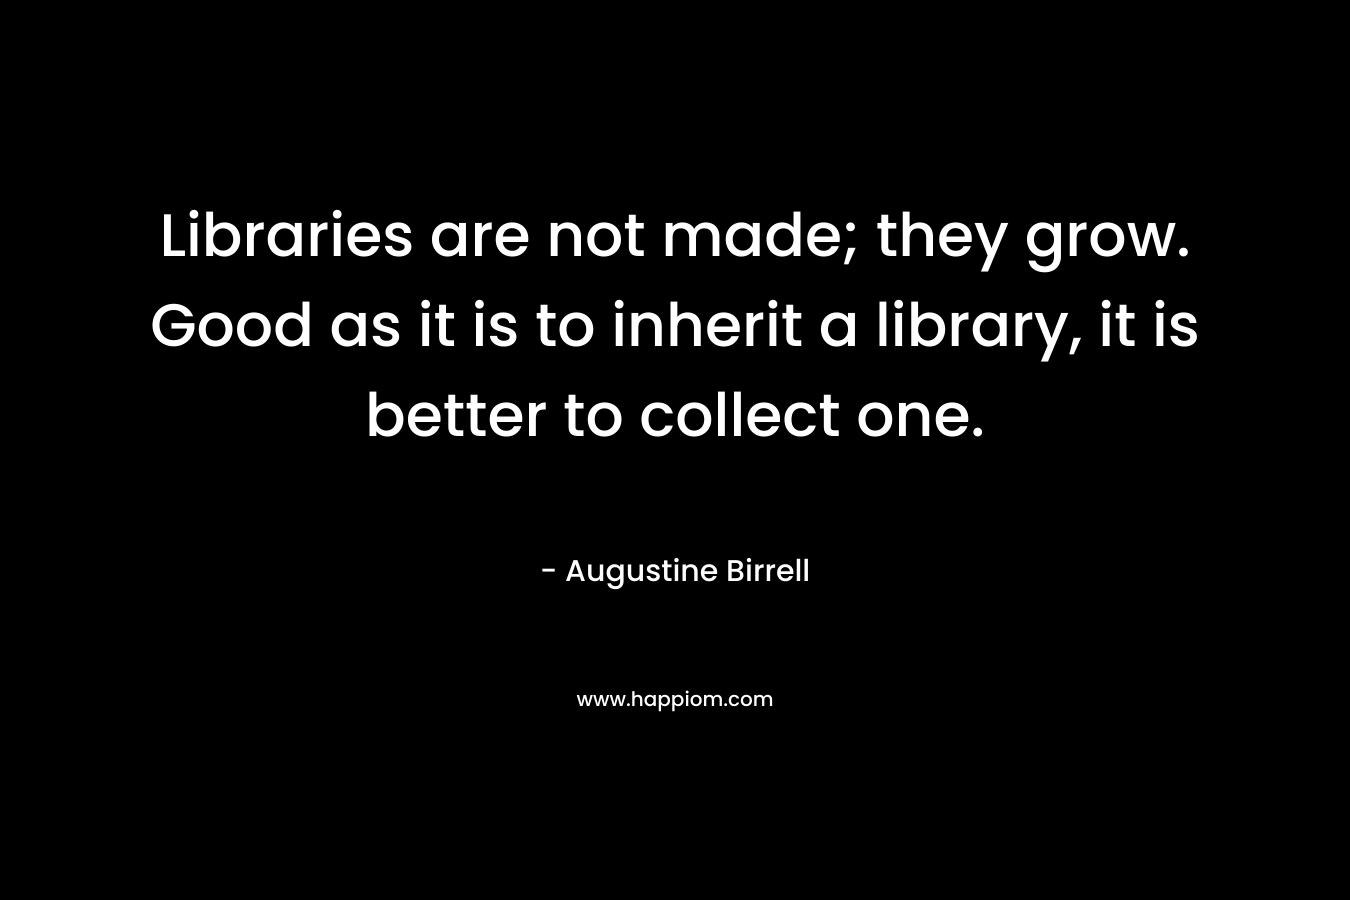 Libraries are not made; they grow. Good as it is to inherit a library, it is better to collect one. – Augustine Birrell